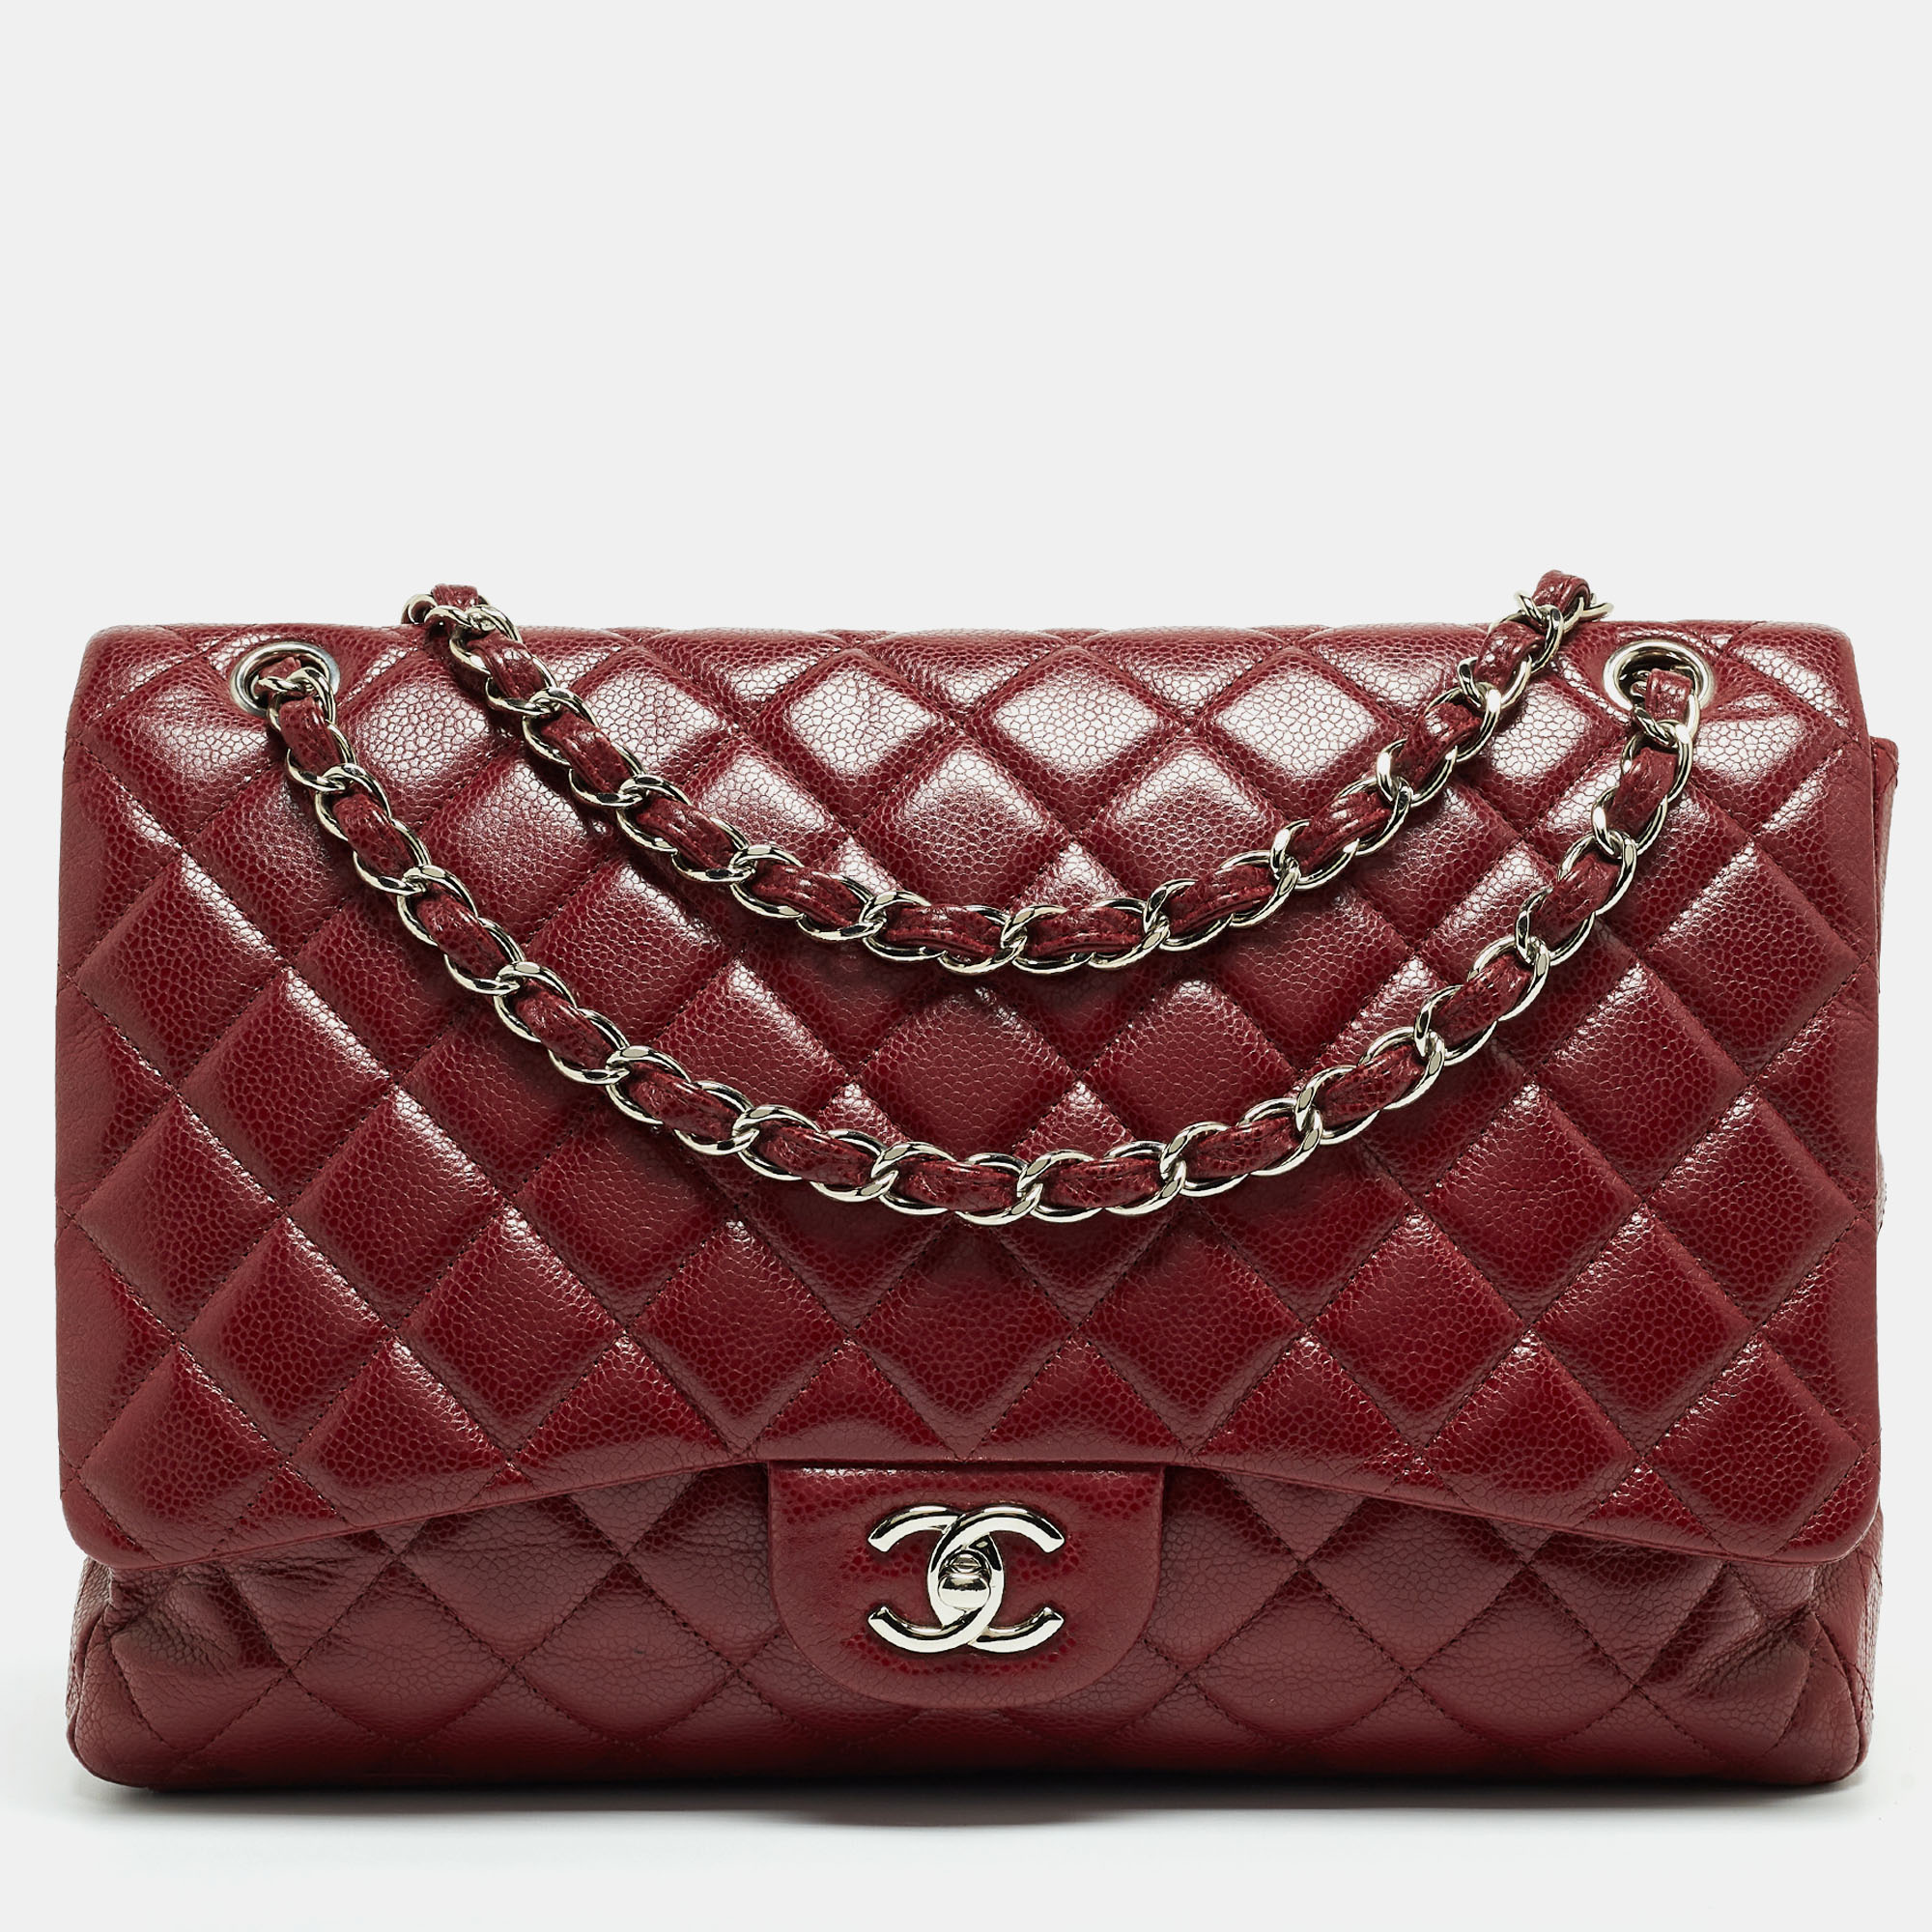 Pre-owned Chanel Burgundy Quilted Caviar Leather Maxi Classic Single Flap Bag